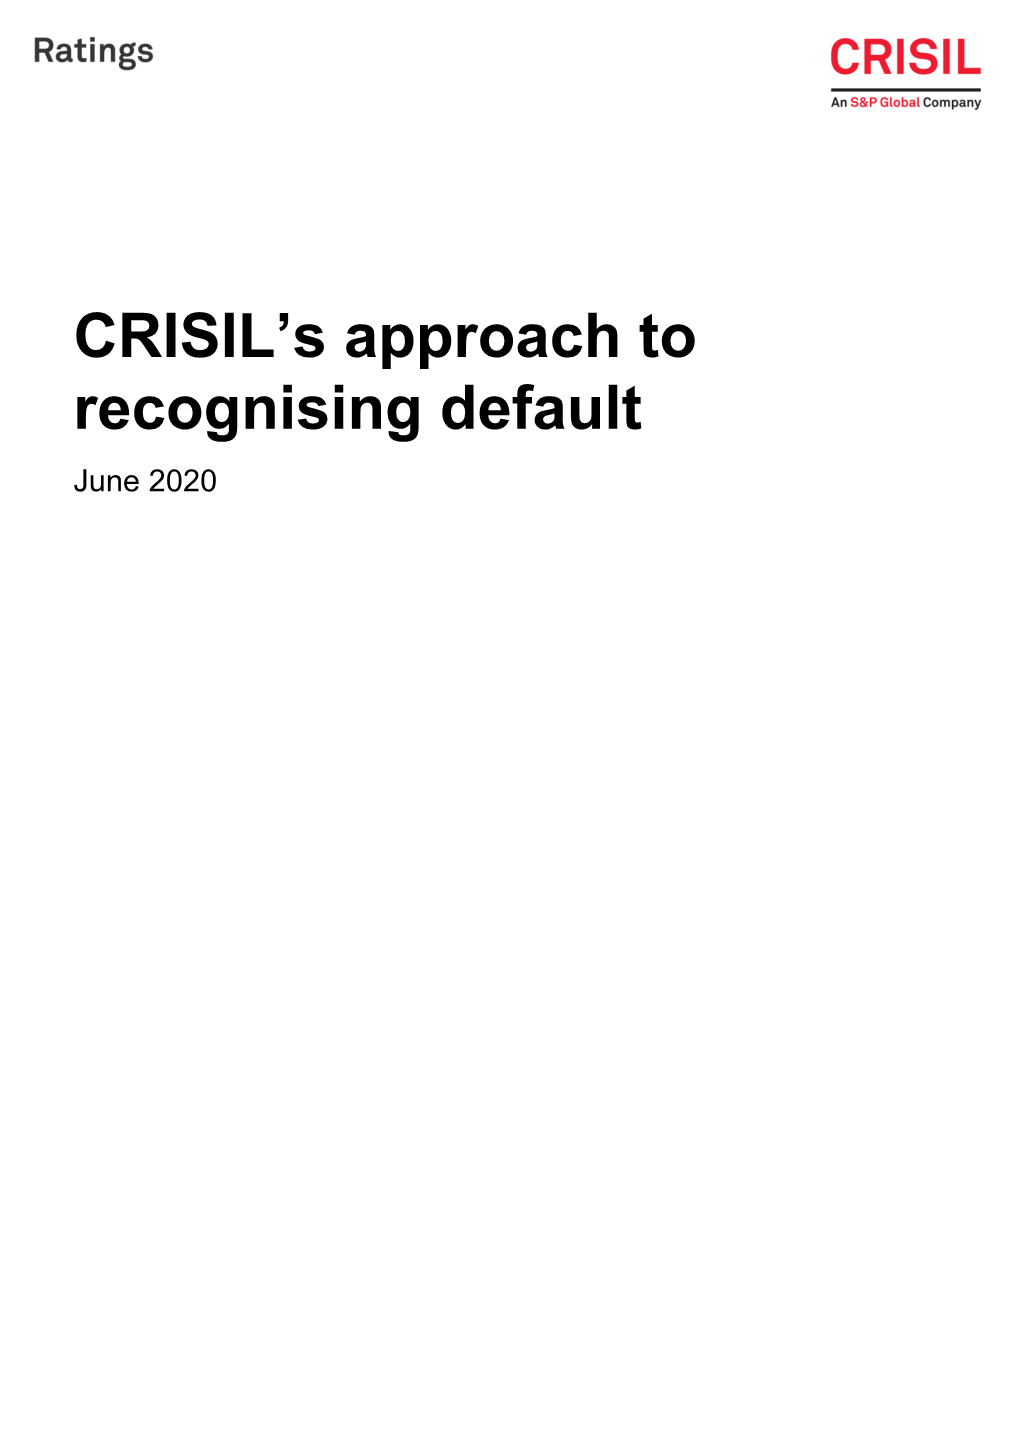 CRISIL's Approach to Recognising Default